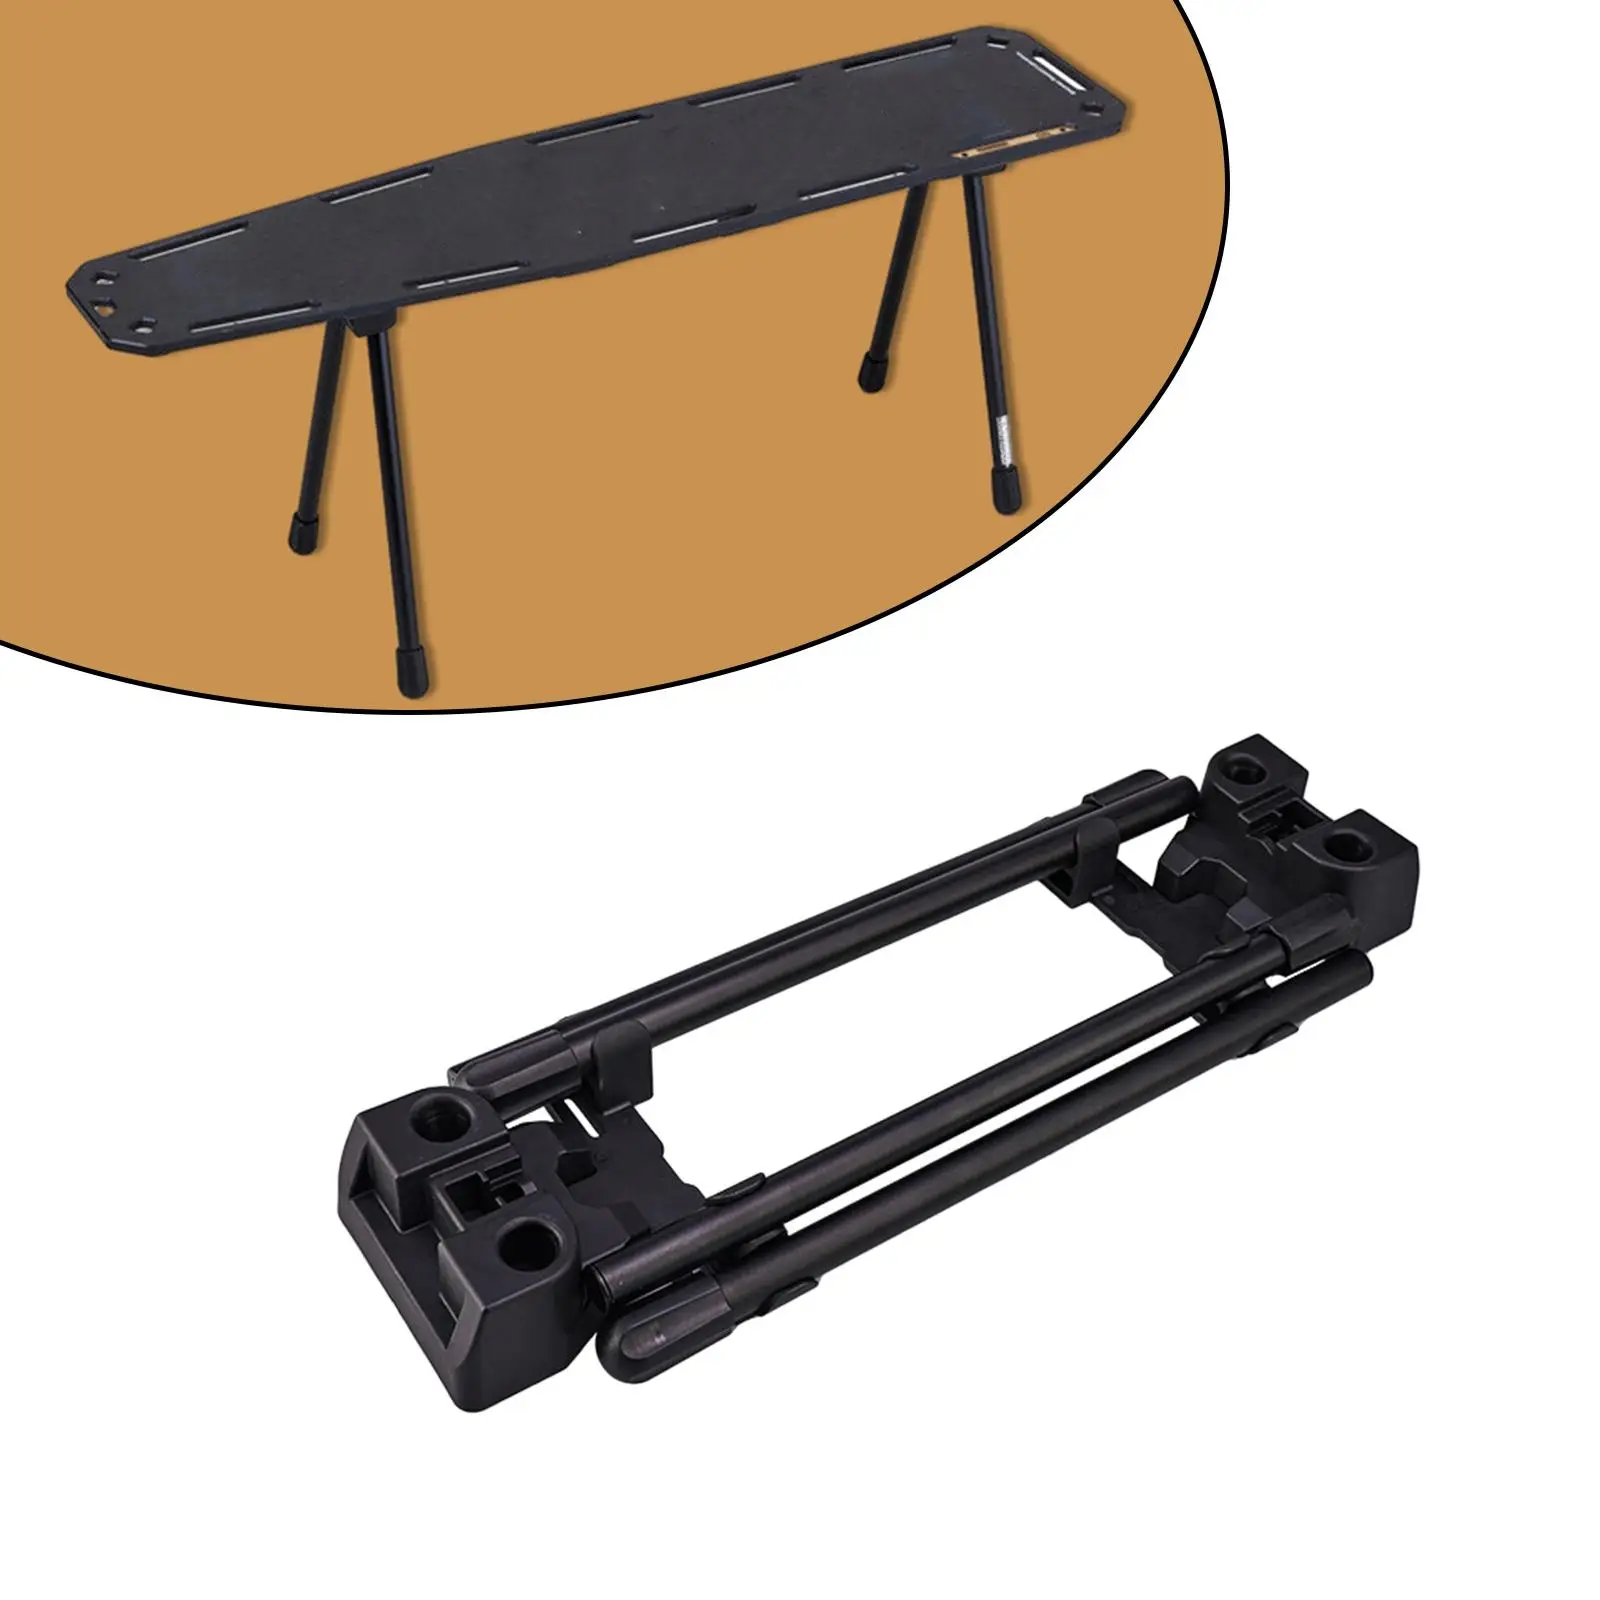 2 Pieces Folding Table Legs Modern DIY Replacement Furniture Legs for Home Living Room Camping Table Coffee Table Laptop Table